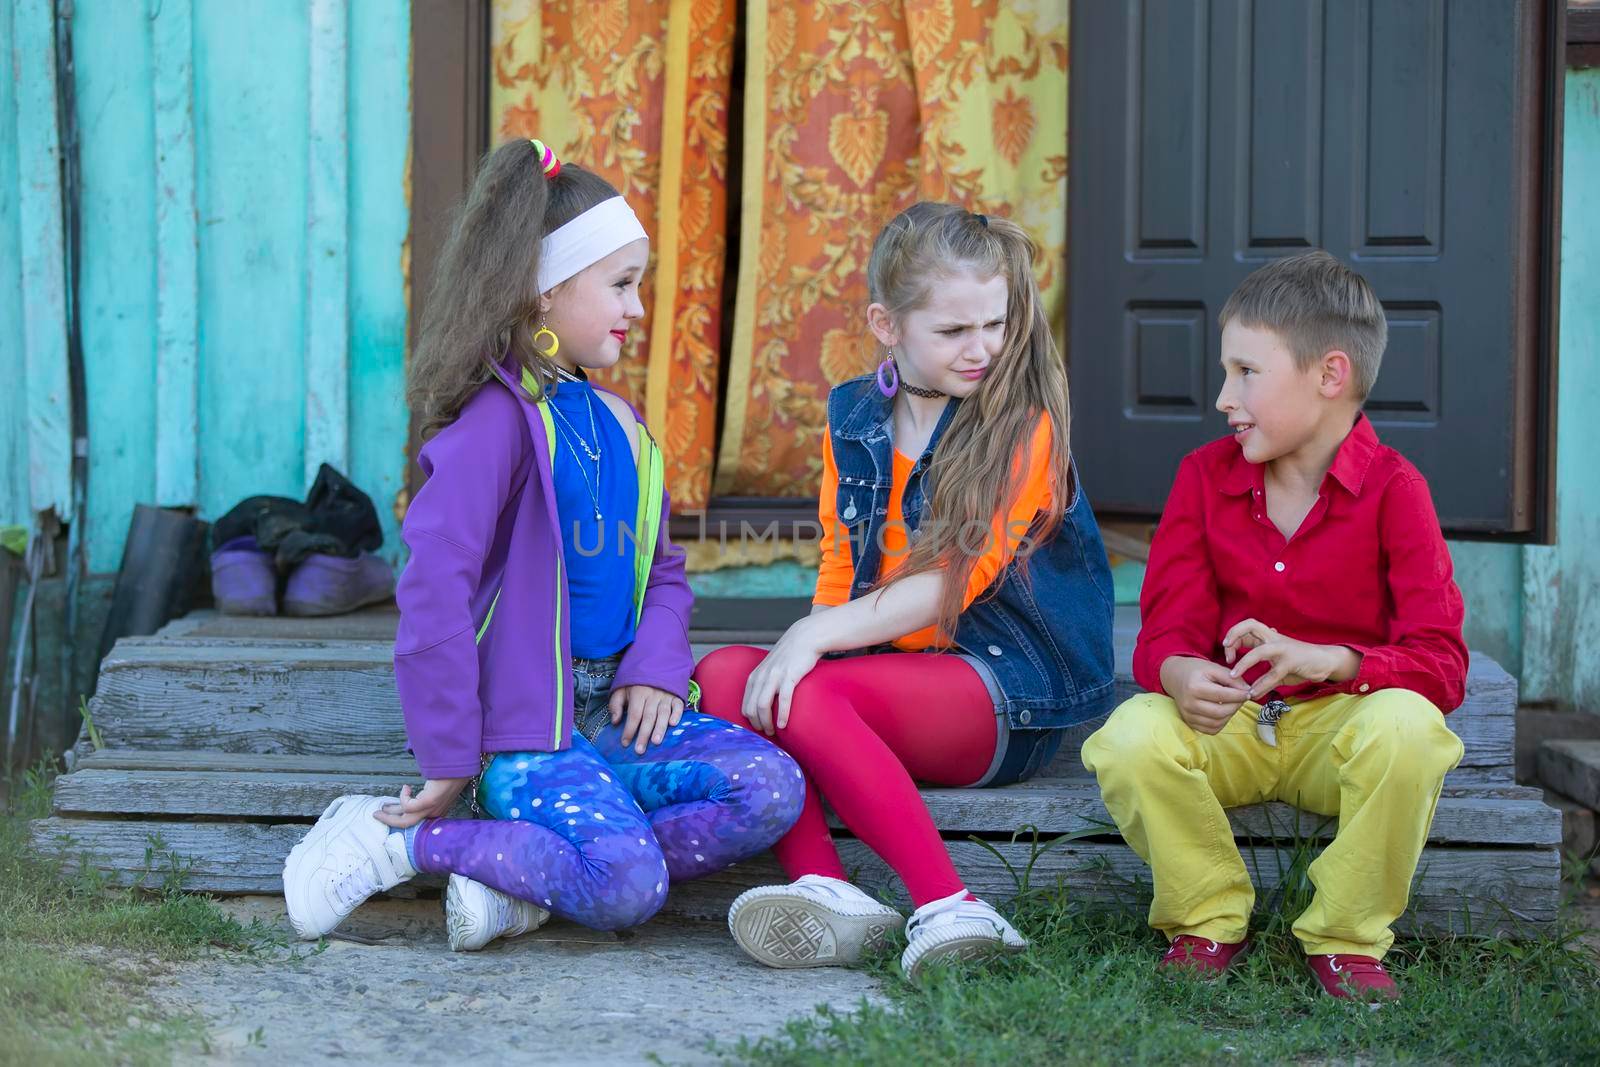 Funny little children: girls with bright makeup dressed in the style of the nineties and a boy in a red shirt are sitting on the village porch of the house. Russian village children.